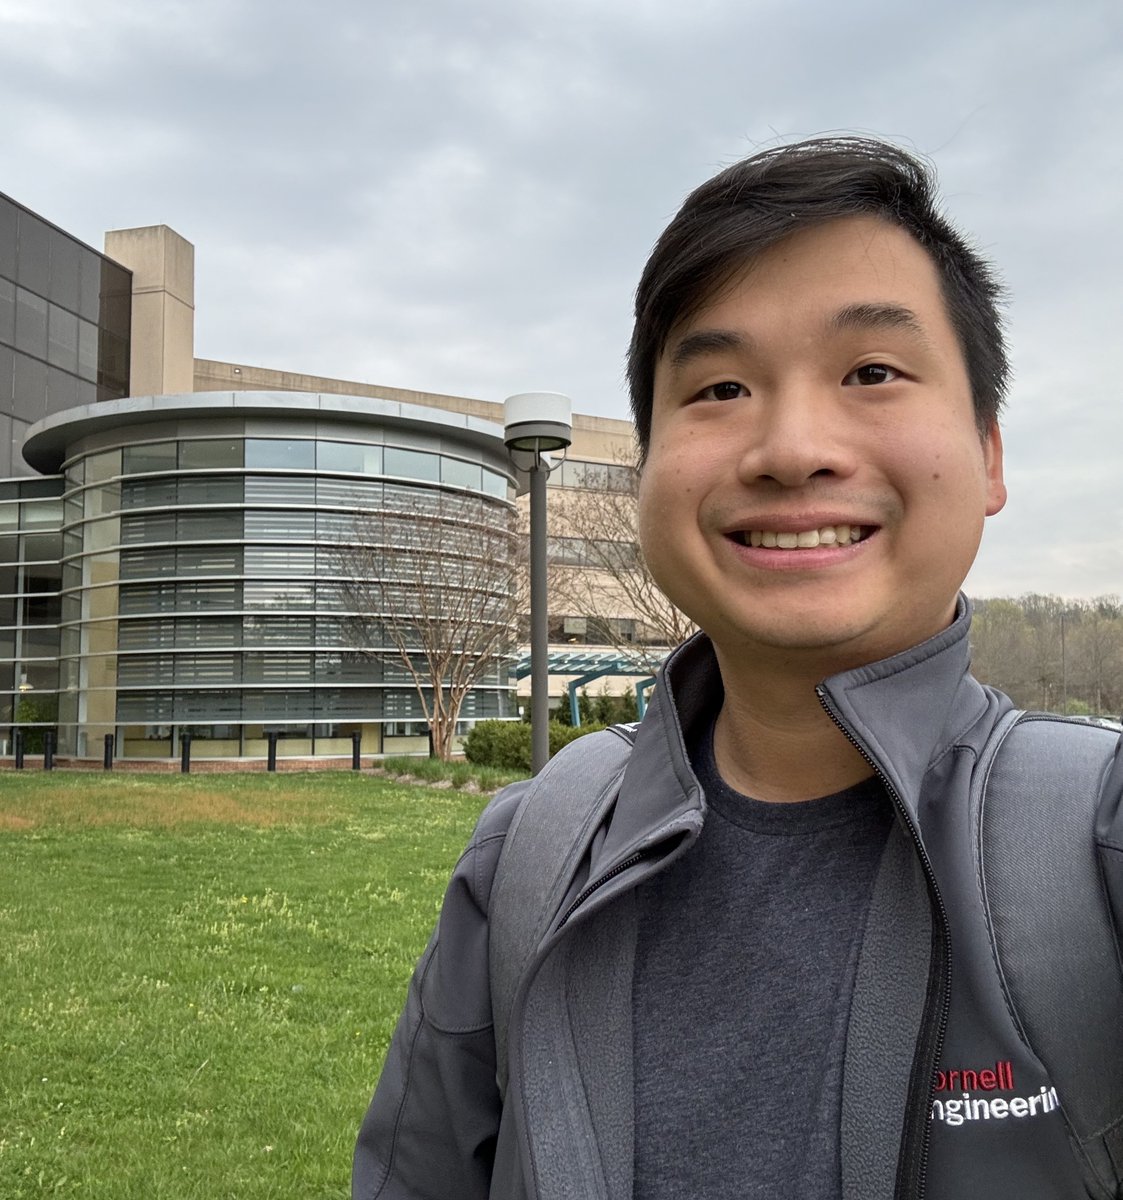 Hi, I am Calvin Kuo! Follow along to see a day in my life as a distance learning M.Eng. student in Engineering Management at Cornell. #CornellMEM #CornellEngineering